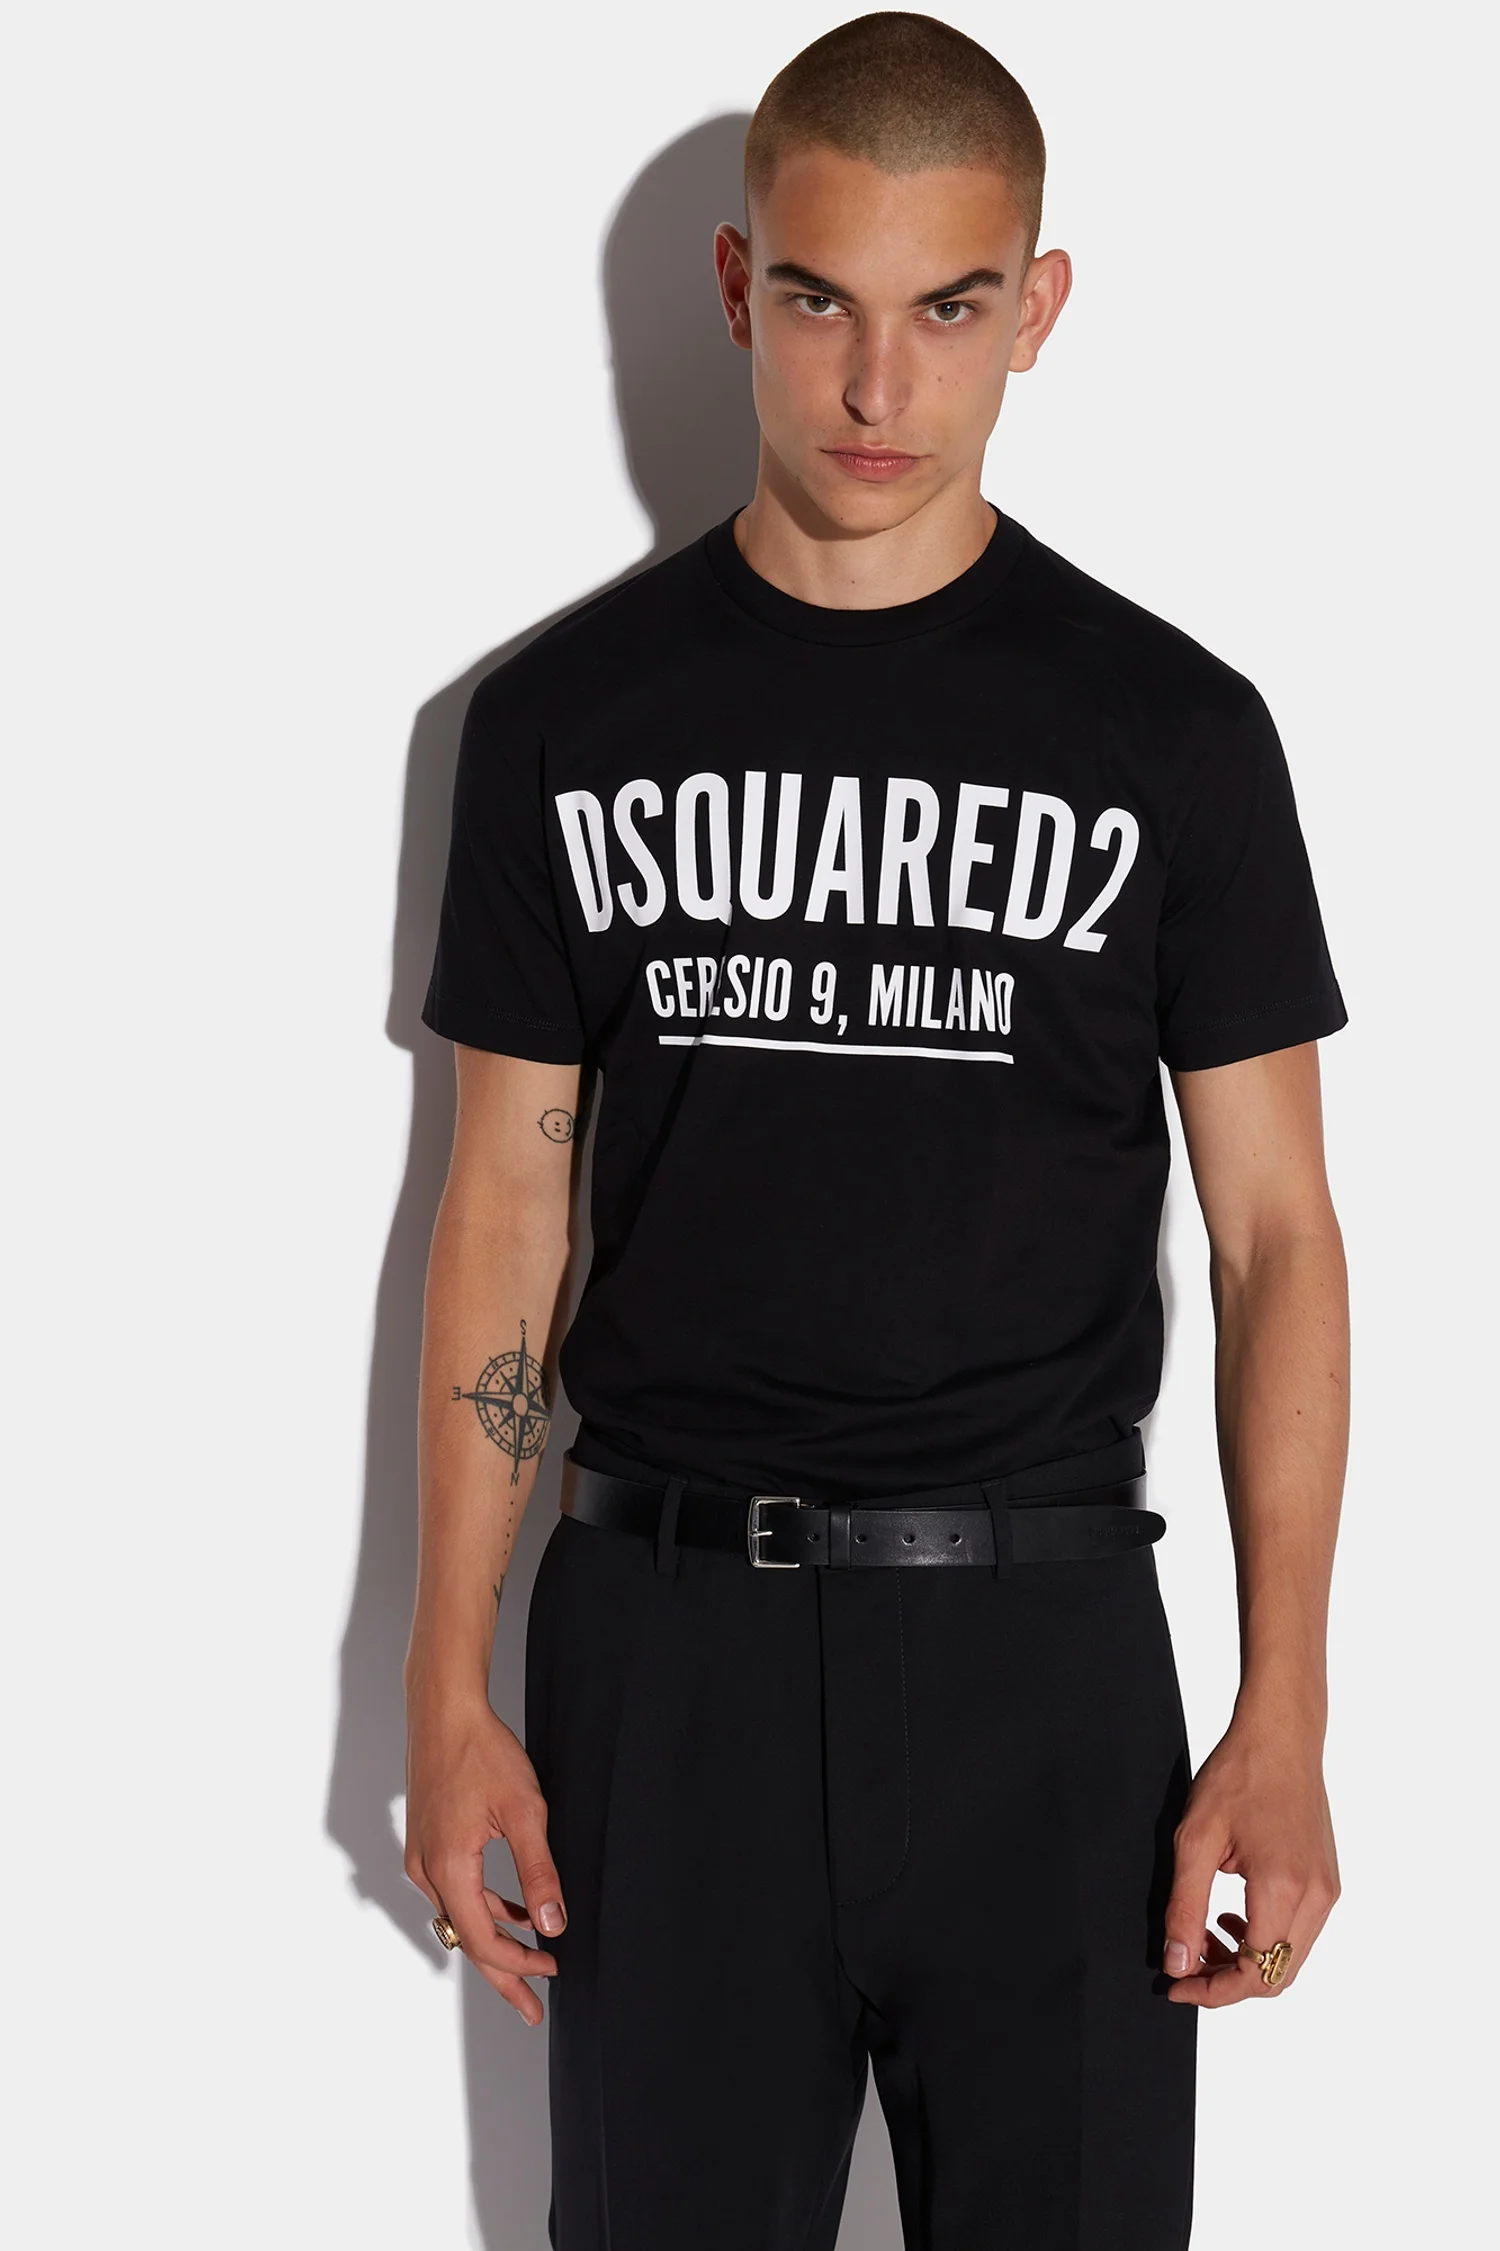 hot 2021 summer new brand dsquared2 letter printed t shirt mens casual fashion loose breathable oversized tops m xxxl free global shipping